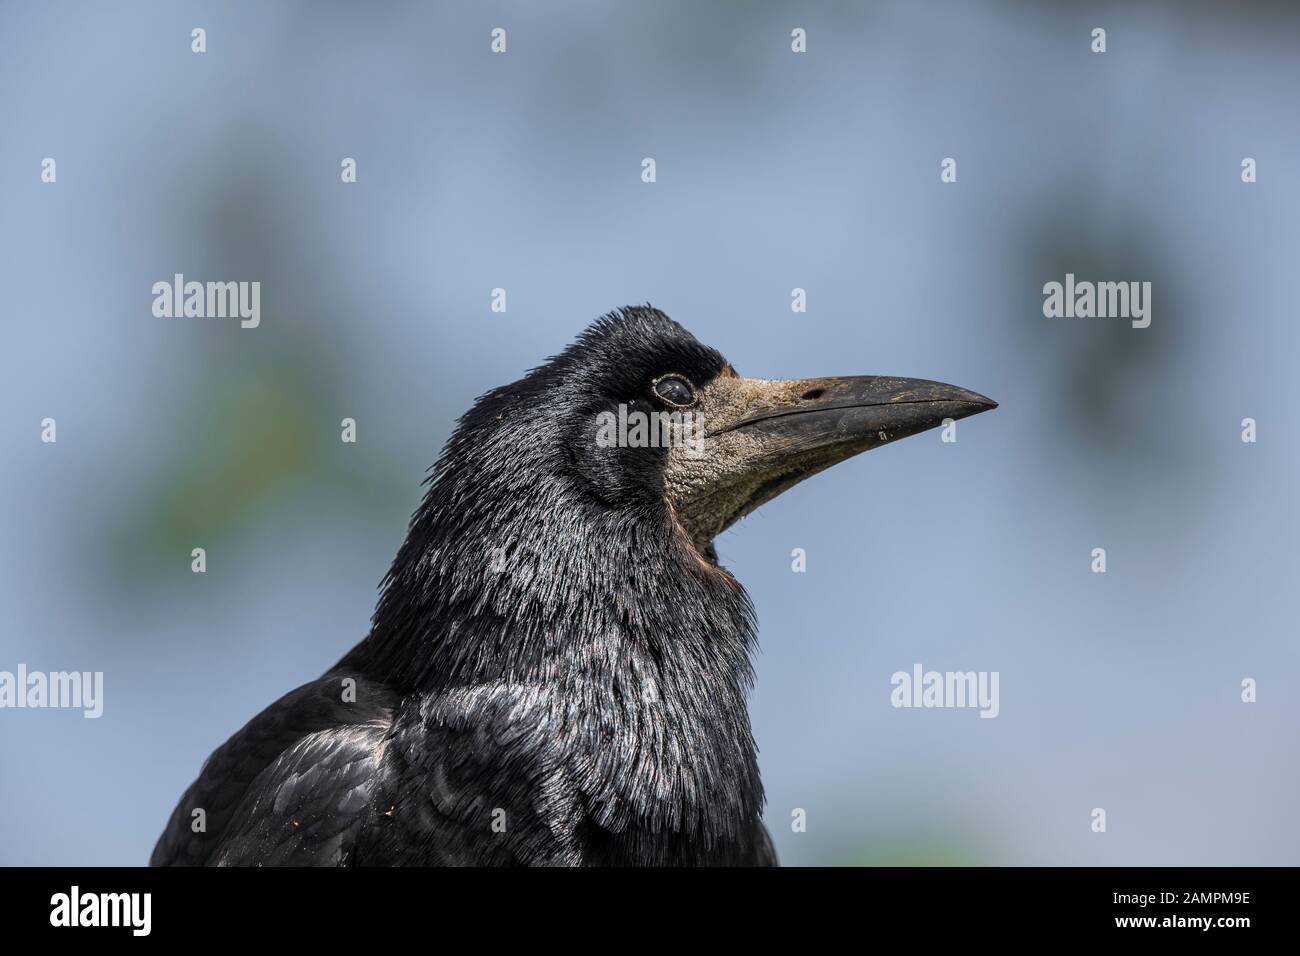 Side view close up of wild UK rook bird (Corvus frugilegus) isolated outdoors in natural habitat. Rook head with big beak facing right. Crow family. Stock Photo